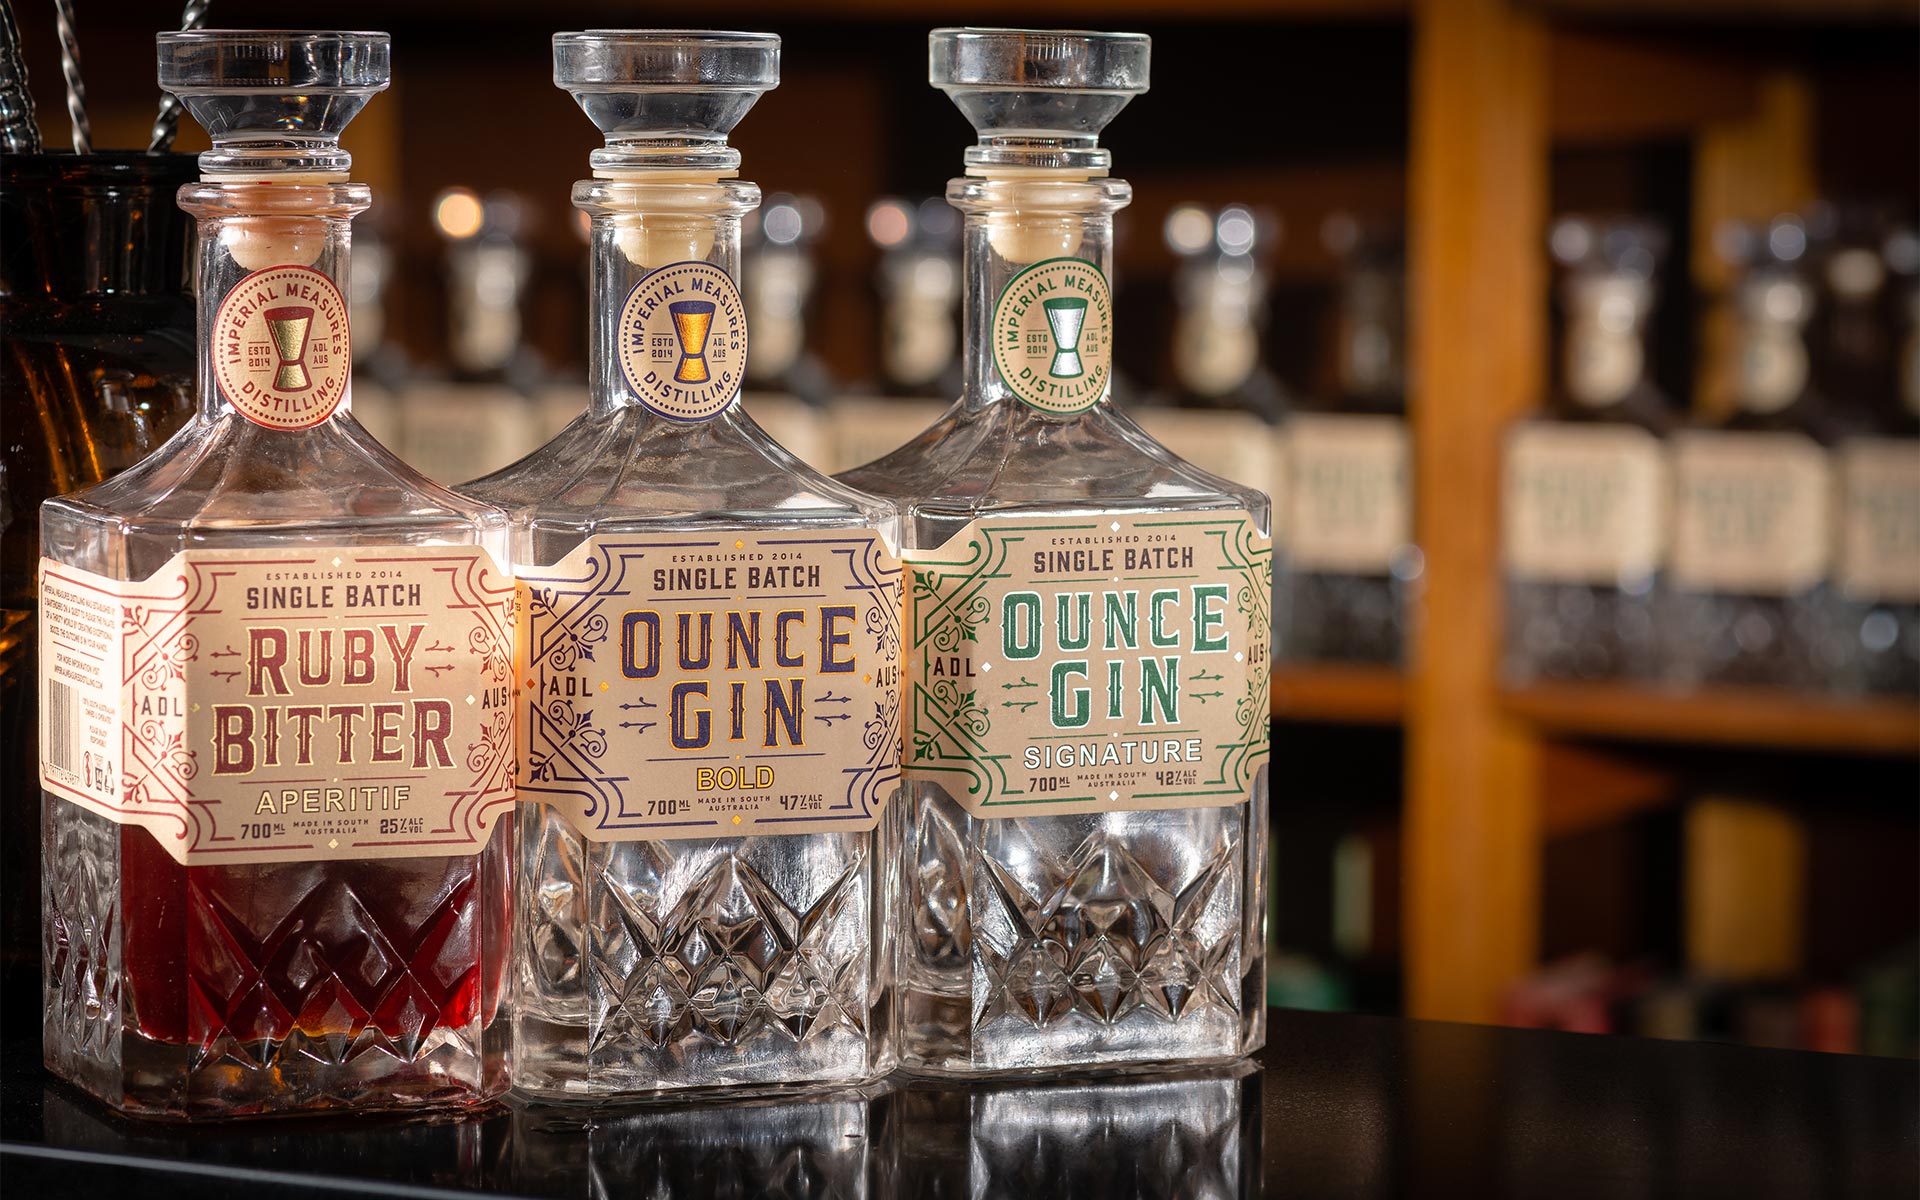 Imperial Measures Ounce Gin - 3 Bottles